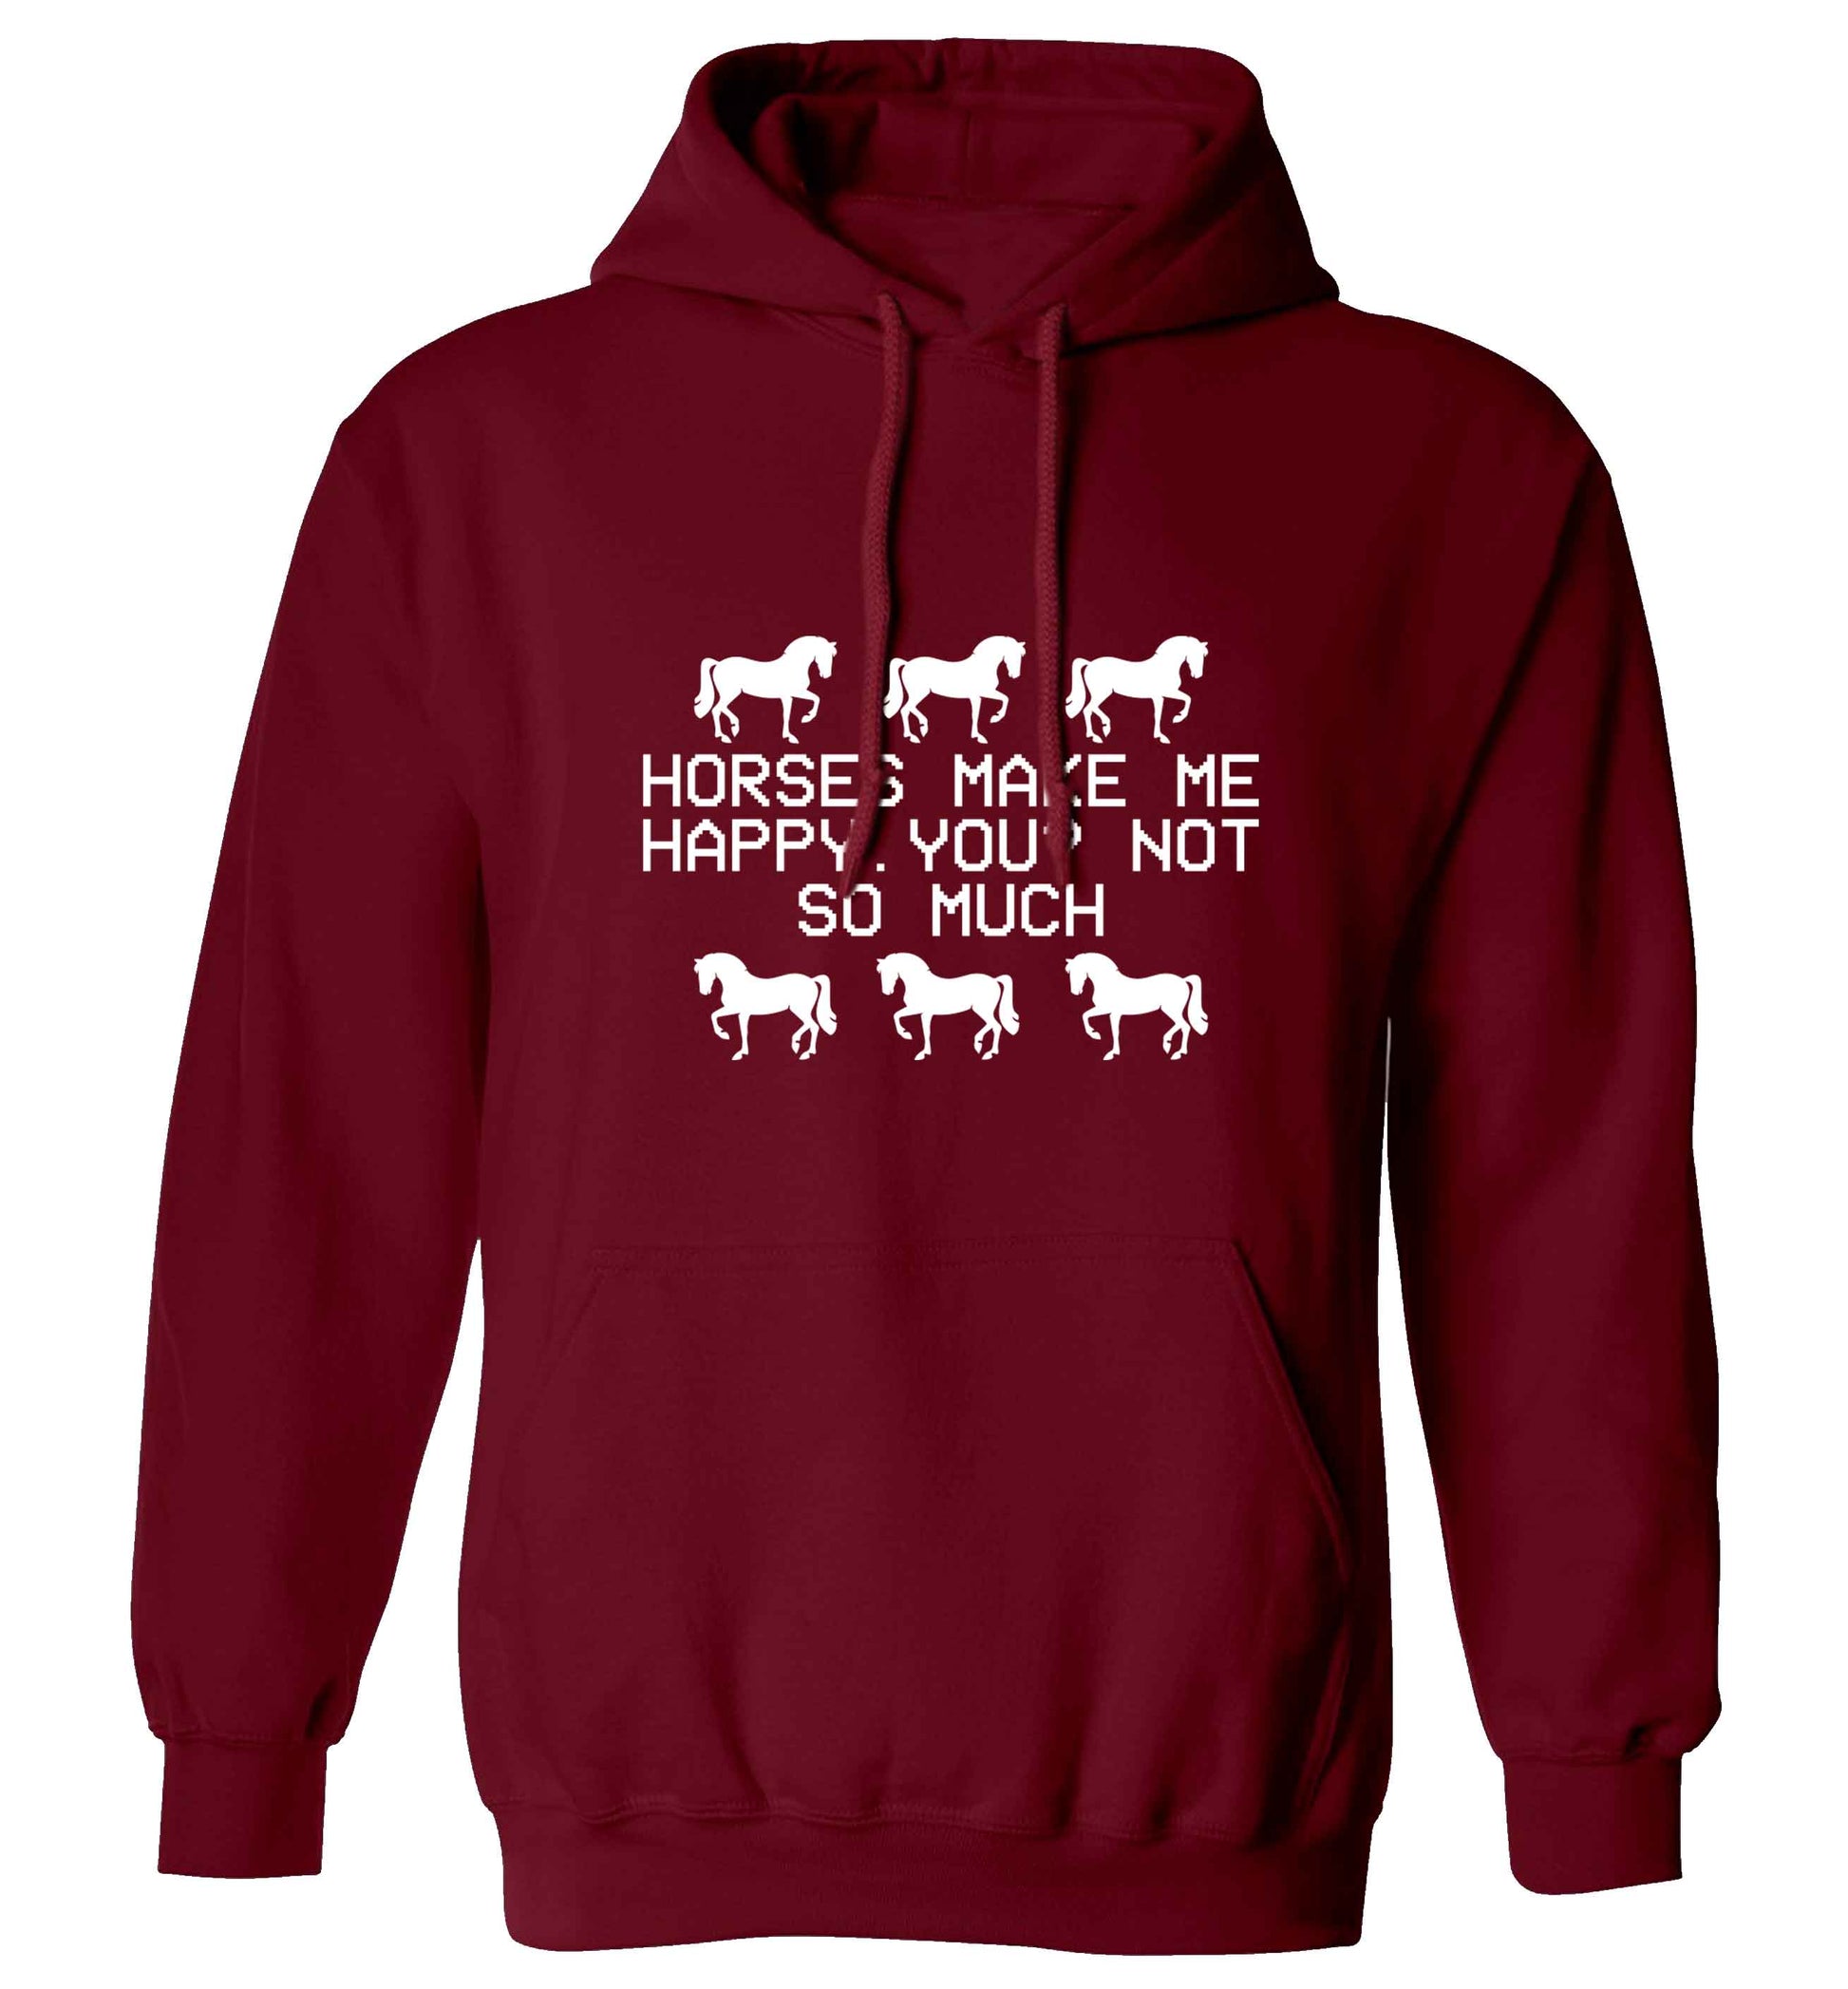 Horses make me happy, you not so much adults unisex maroon hoodie 2XL